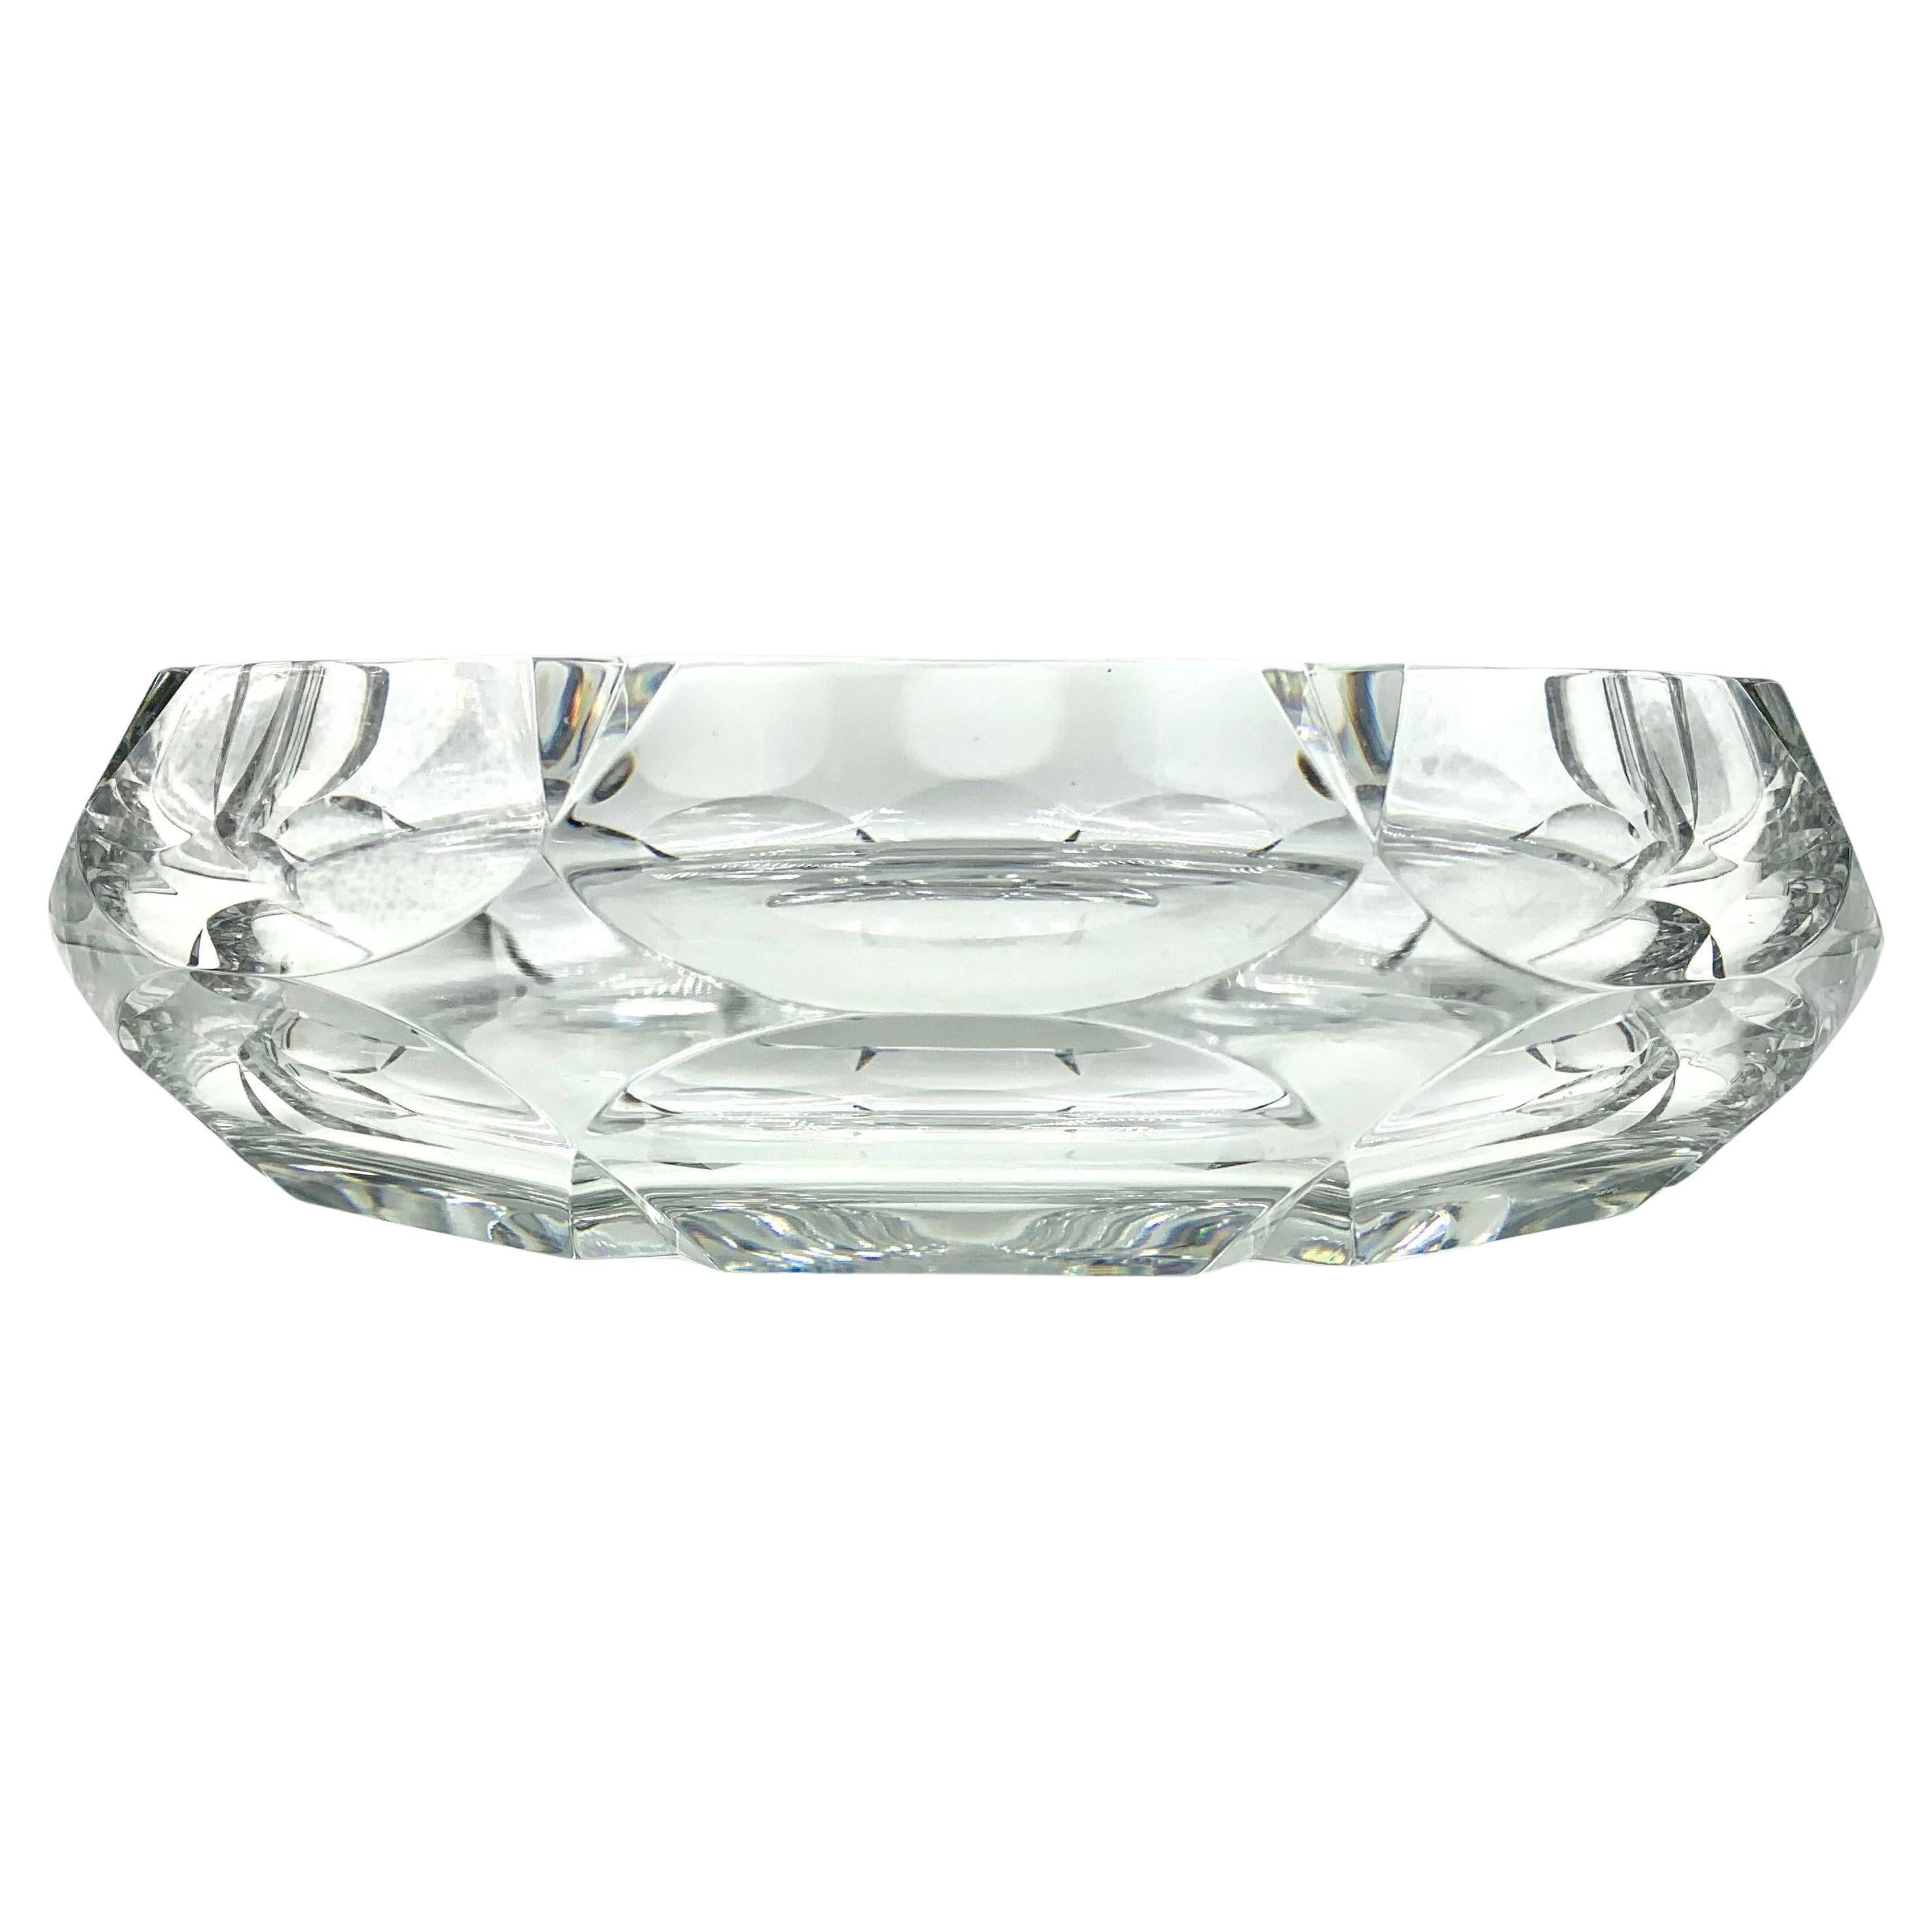 Massive Estate Baccarat Crystal Centerpiece, Early 20th Century For Sale